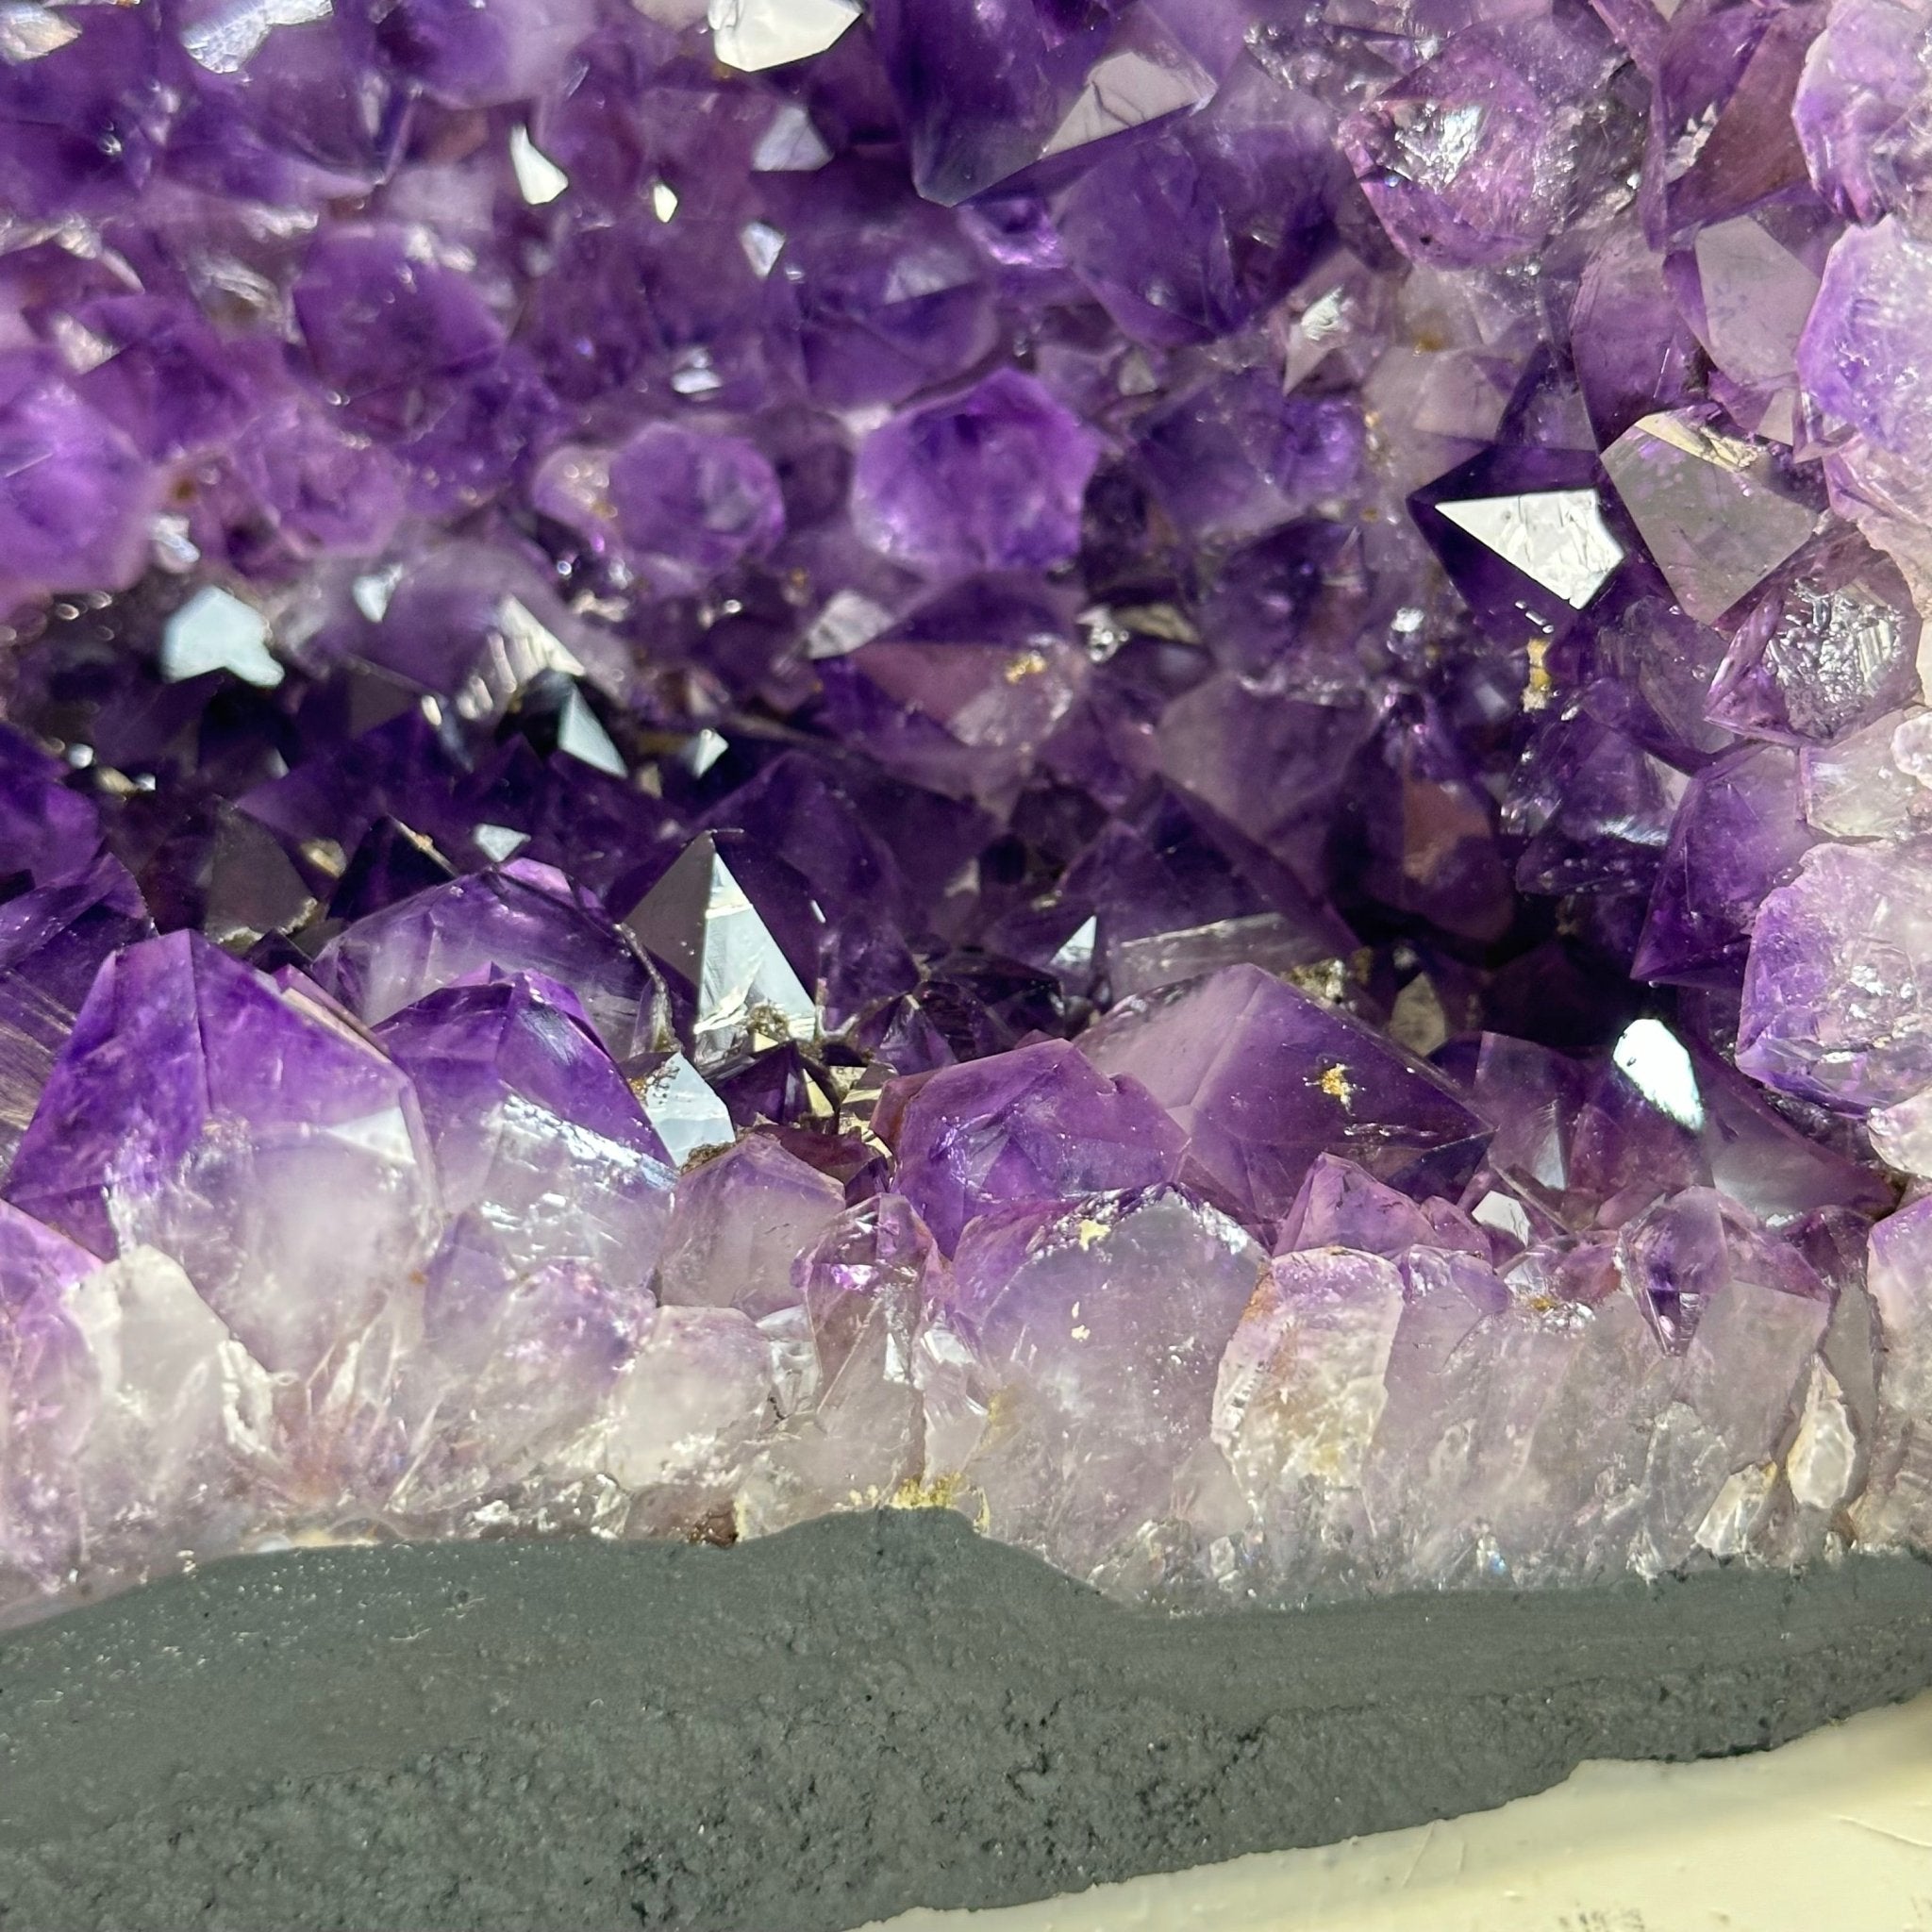 Quality Brazilian Amethyst Cathedral, 16.8 lbs & 7" Tall, #5601 - 1371 - Brazil GemsBrazil GemsQuality Brazilian Amethyst Cathedral, 16.8 lbs & 7" Tall, #5601 - 1371Cathedrals5601 - 1371